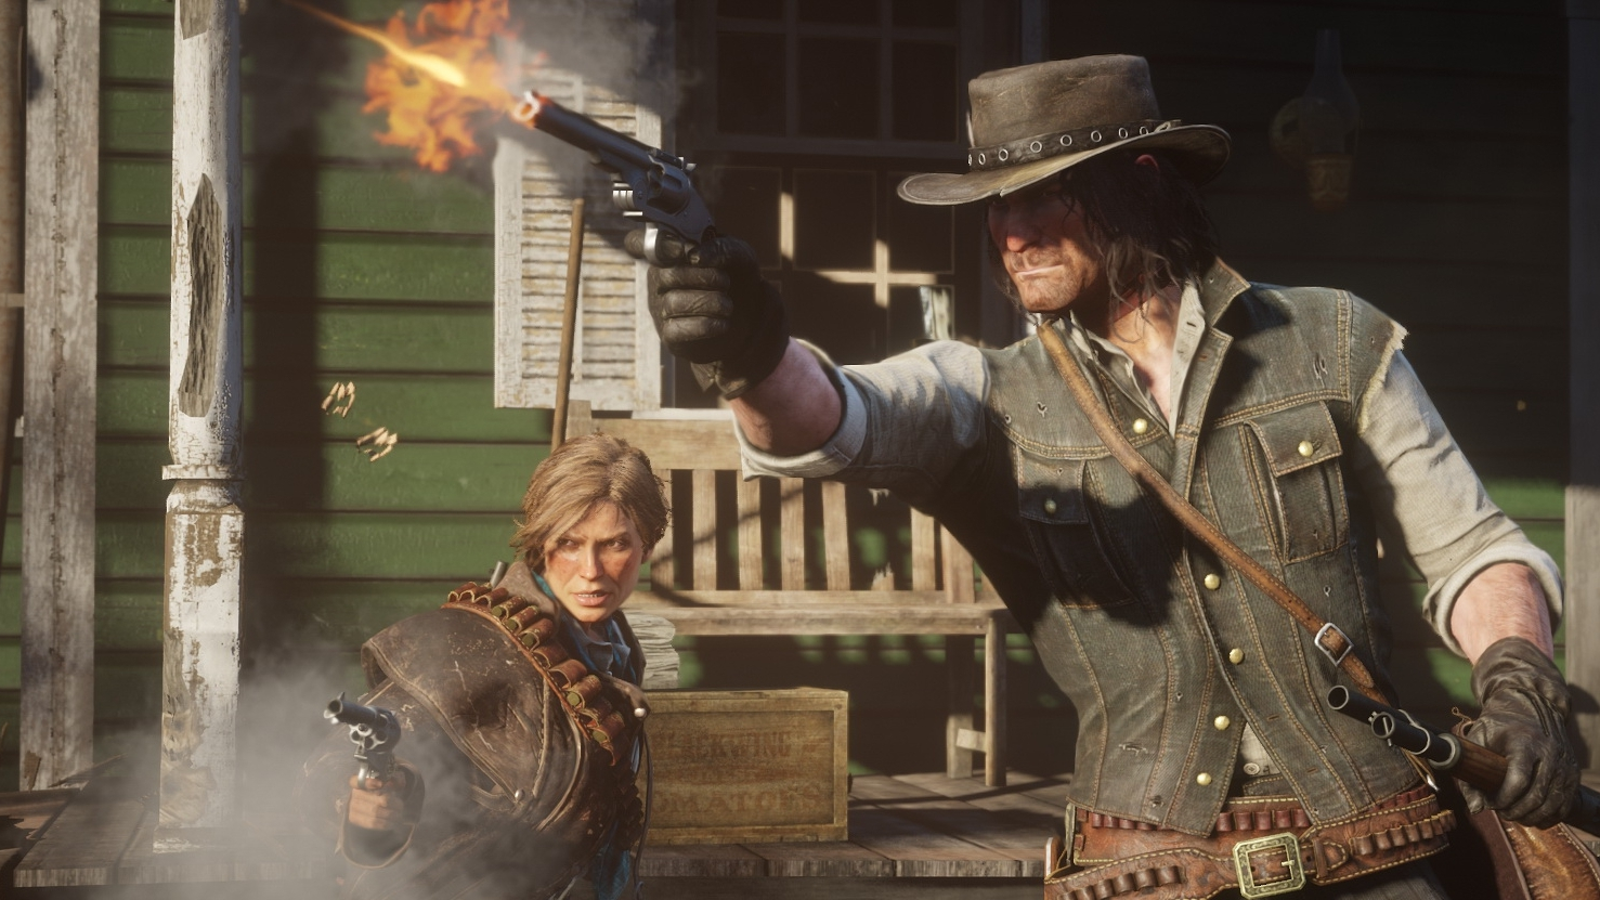 Ongewapend Charlotte Bronte leeftijd Red Dead Redemption 2 looks and plays best on Xbox One X | Eurogamer.net